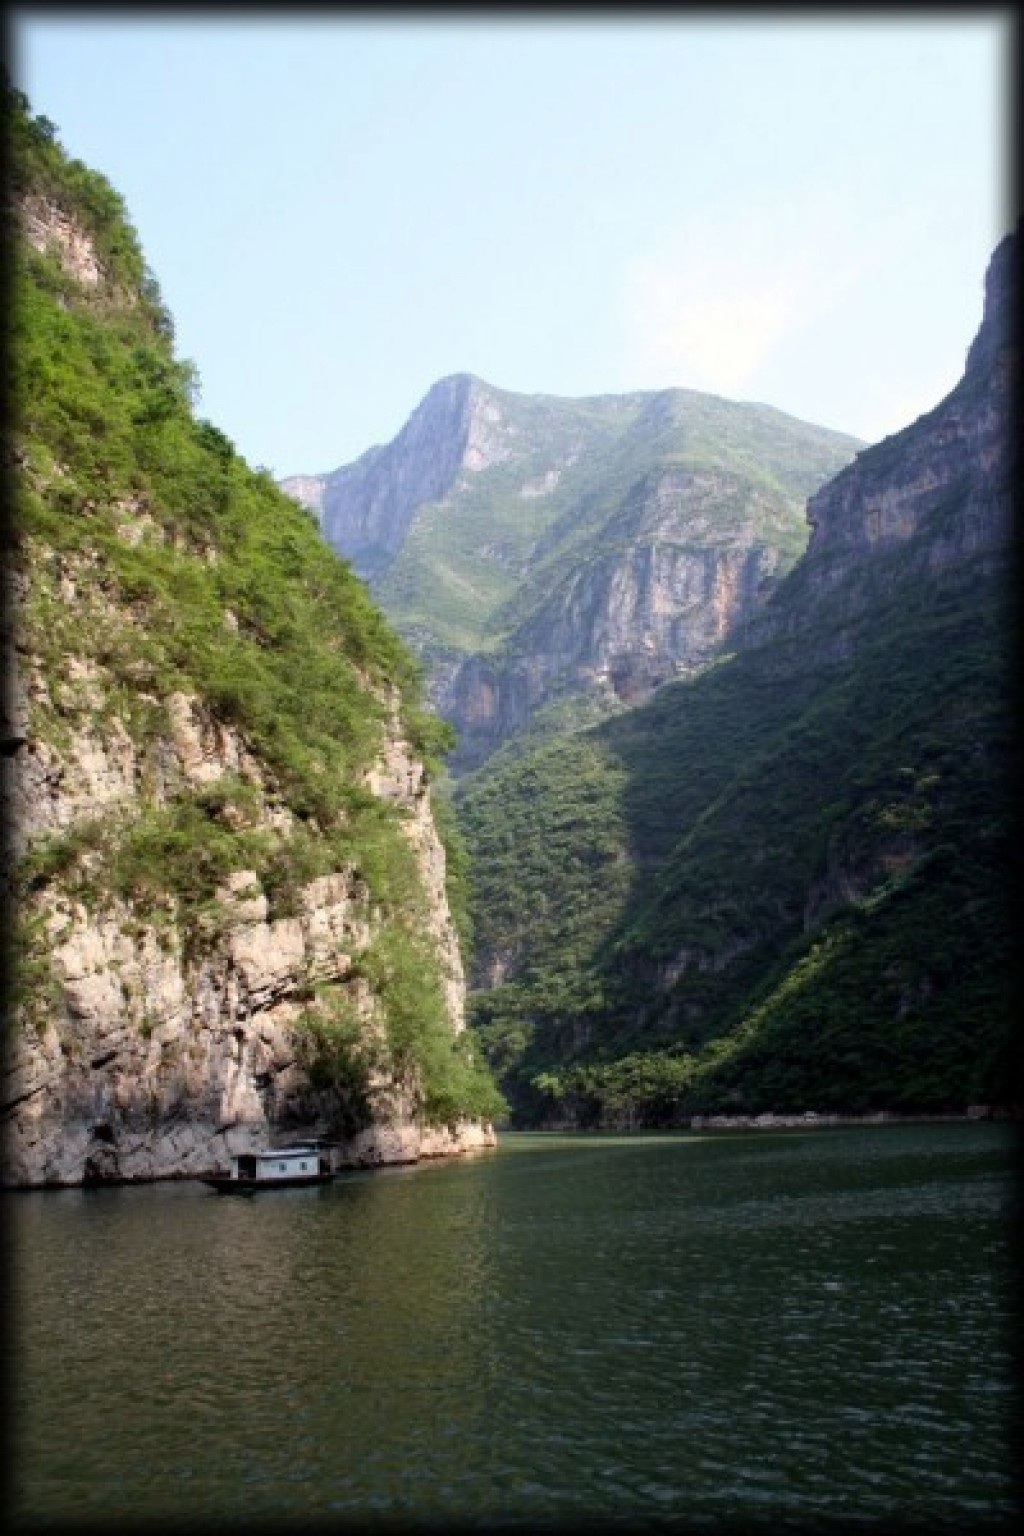 We took a cruise down the Yangtze river for a couple of days.  Although the boat we took left a little to be desired, the scenery was beautiful. 